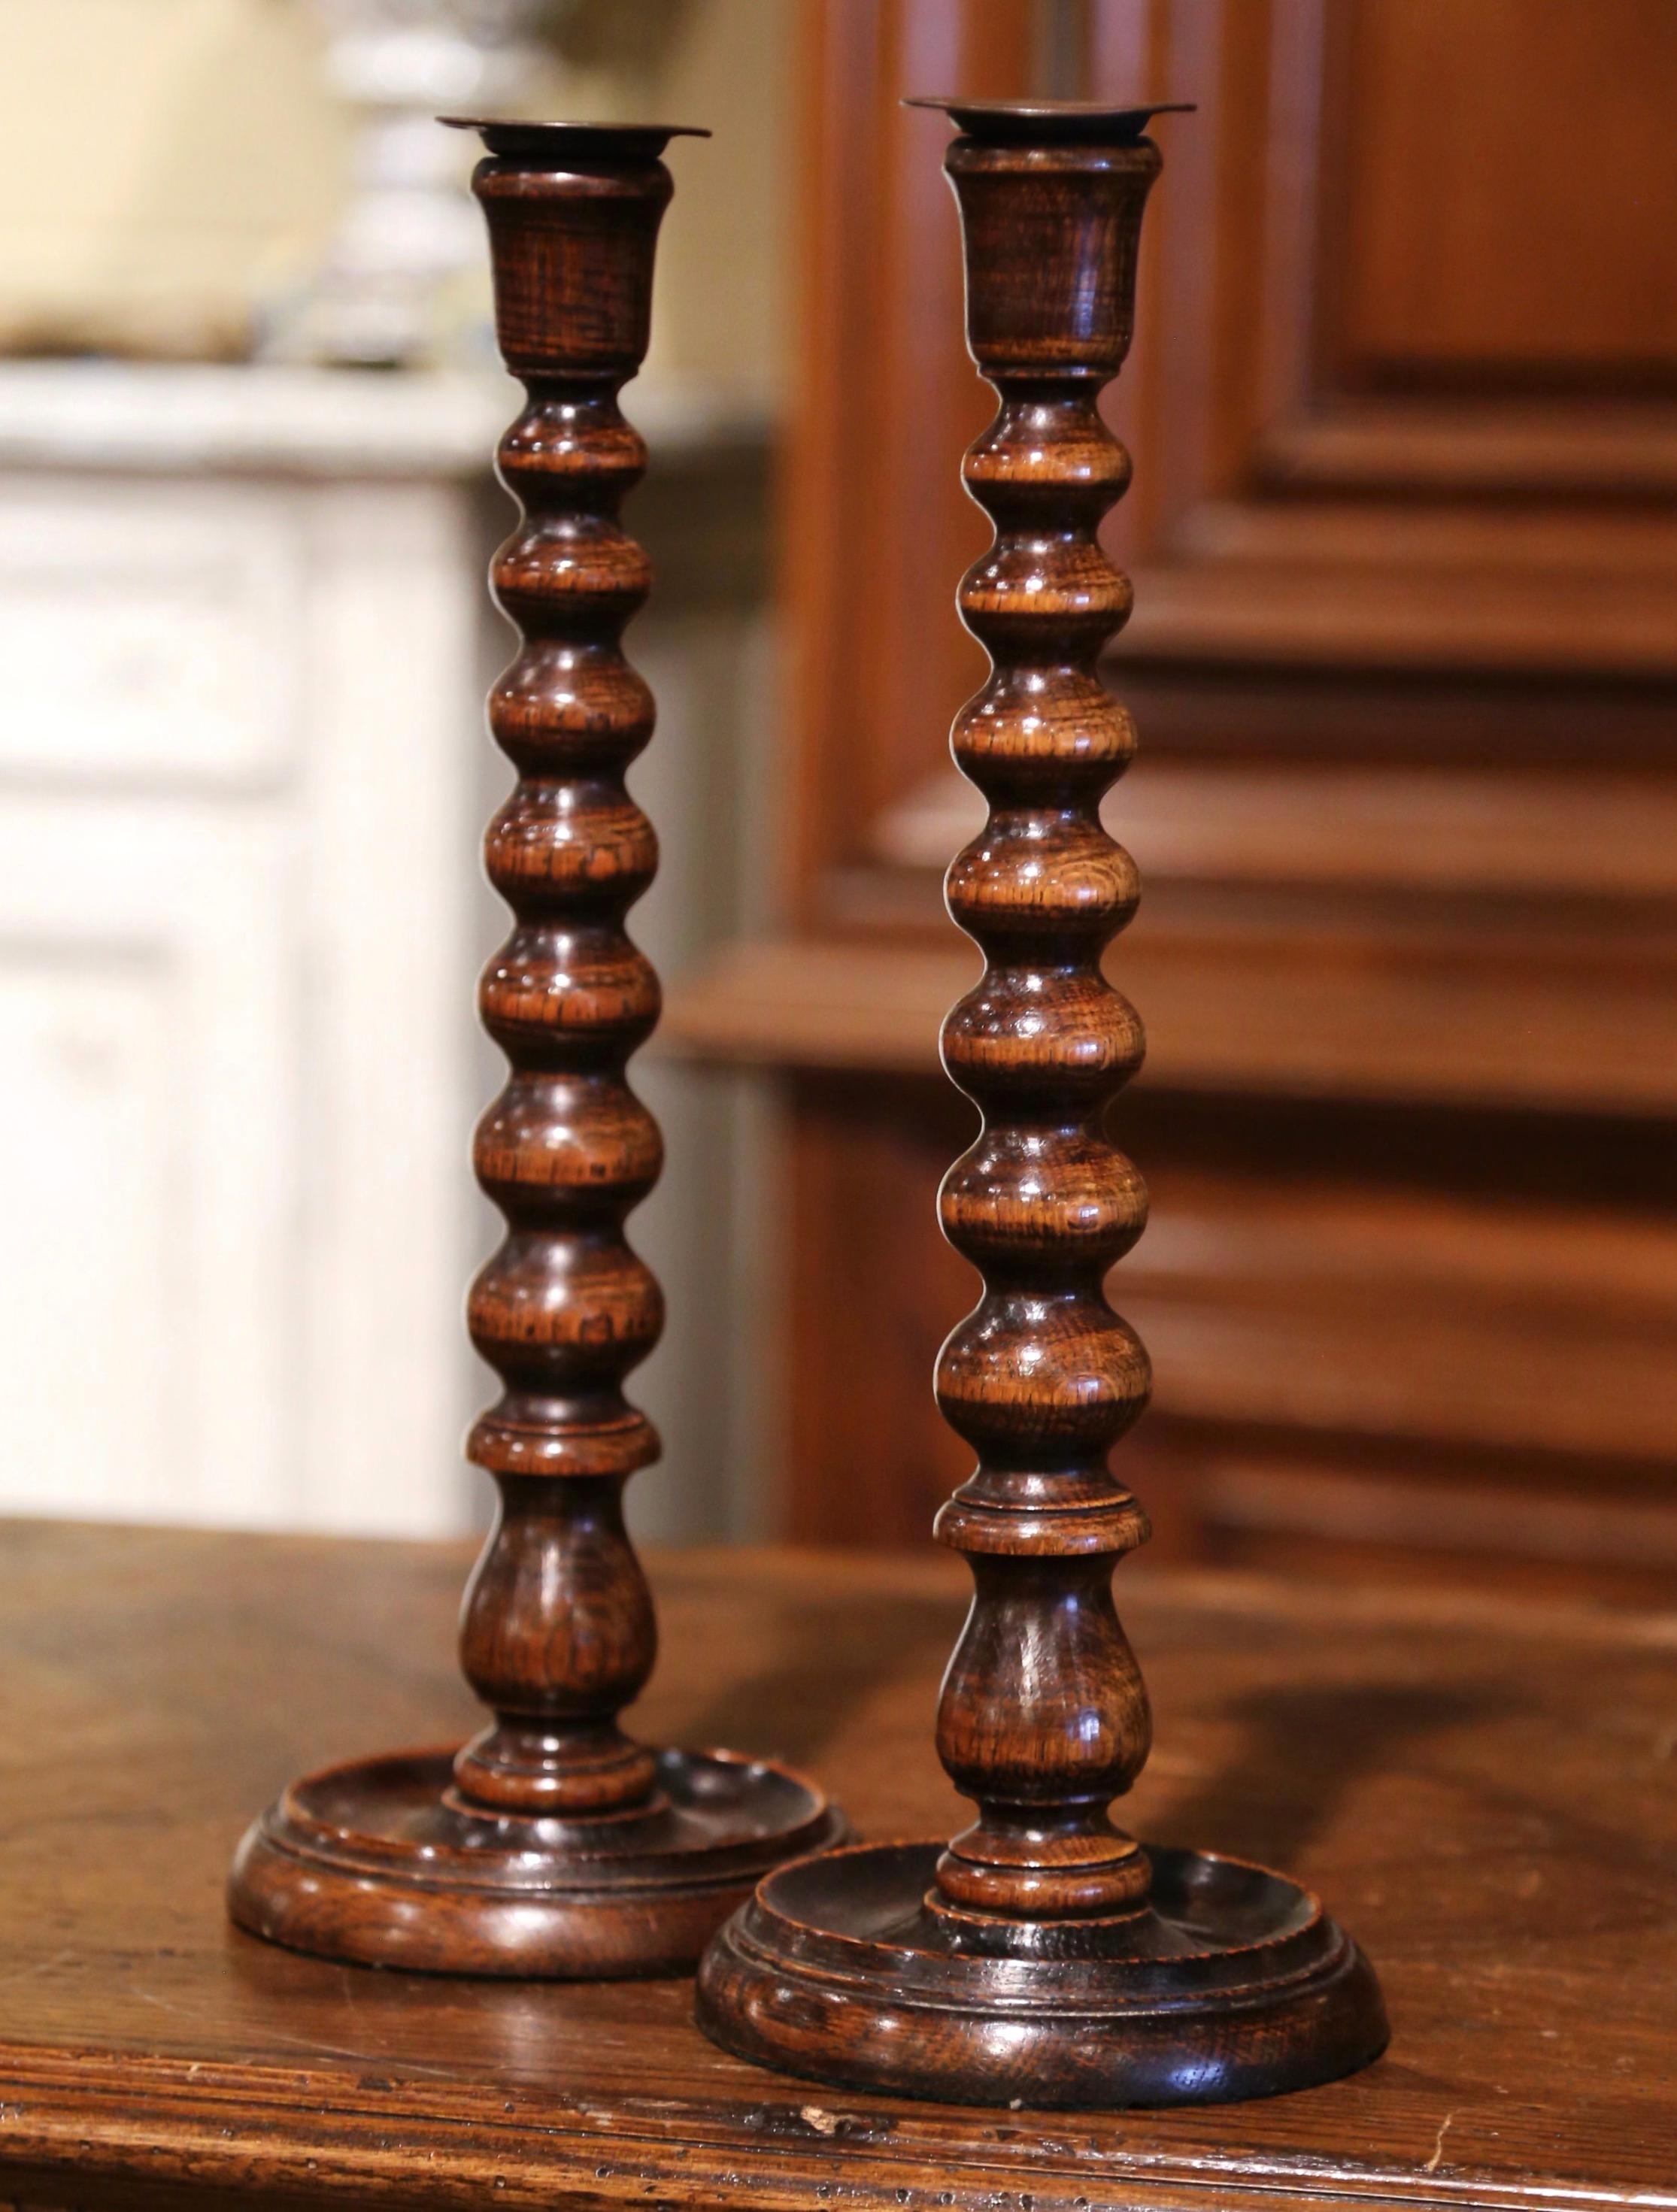 These antique candlesticks were crafted in England circa 1920. Standing on a round base, each candle holder features a open carved bobbin turned stem decorated with a brass bobeche at the top. Both tall candlesticks are in excellent condition with a